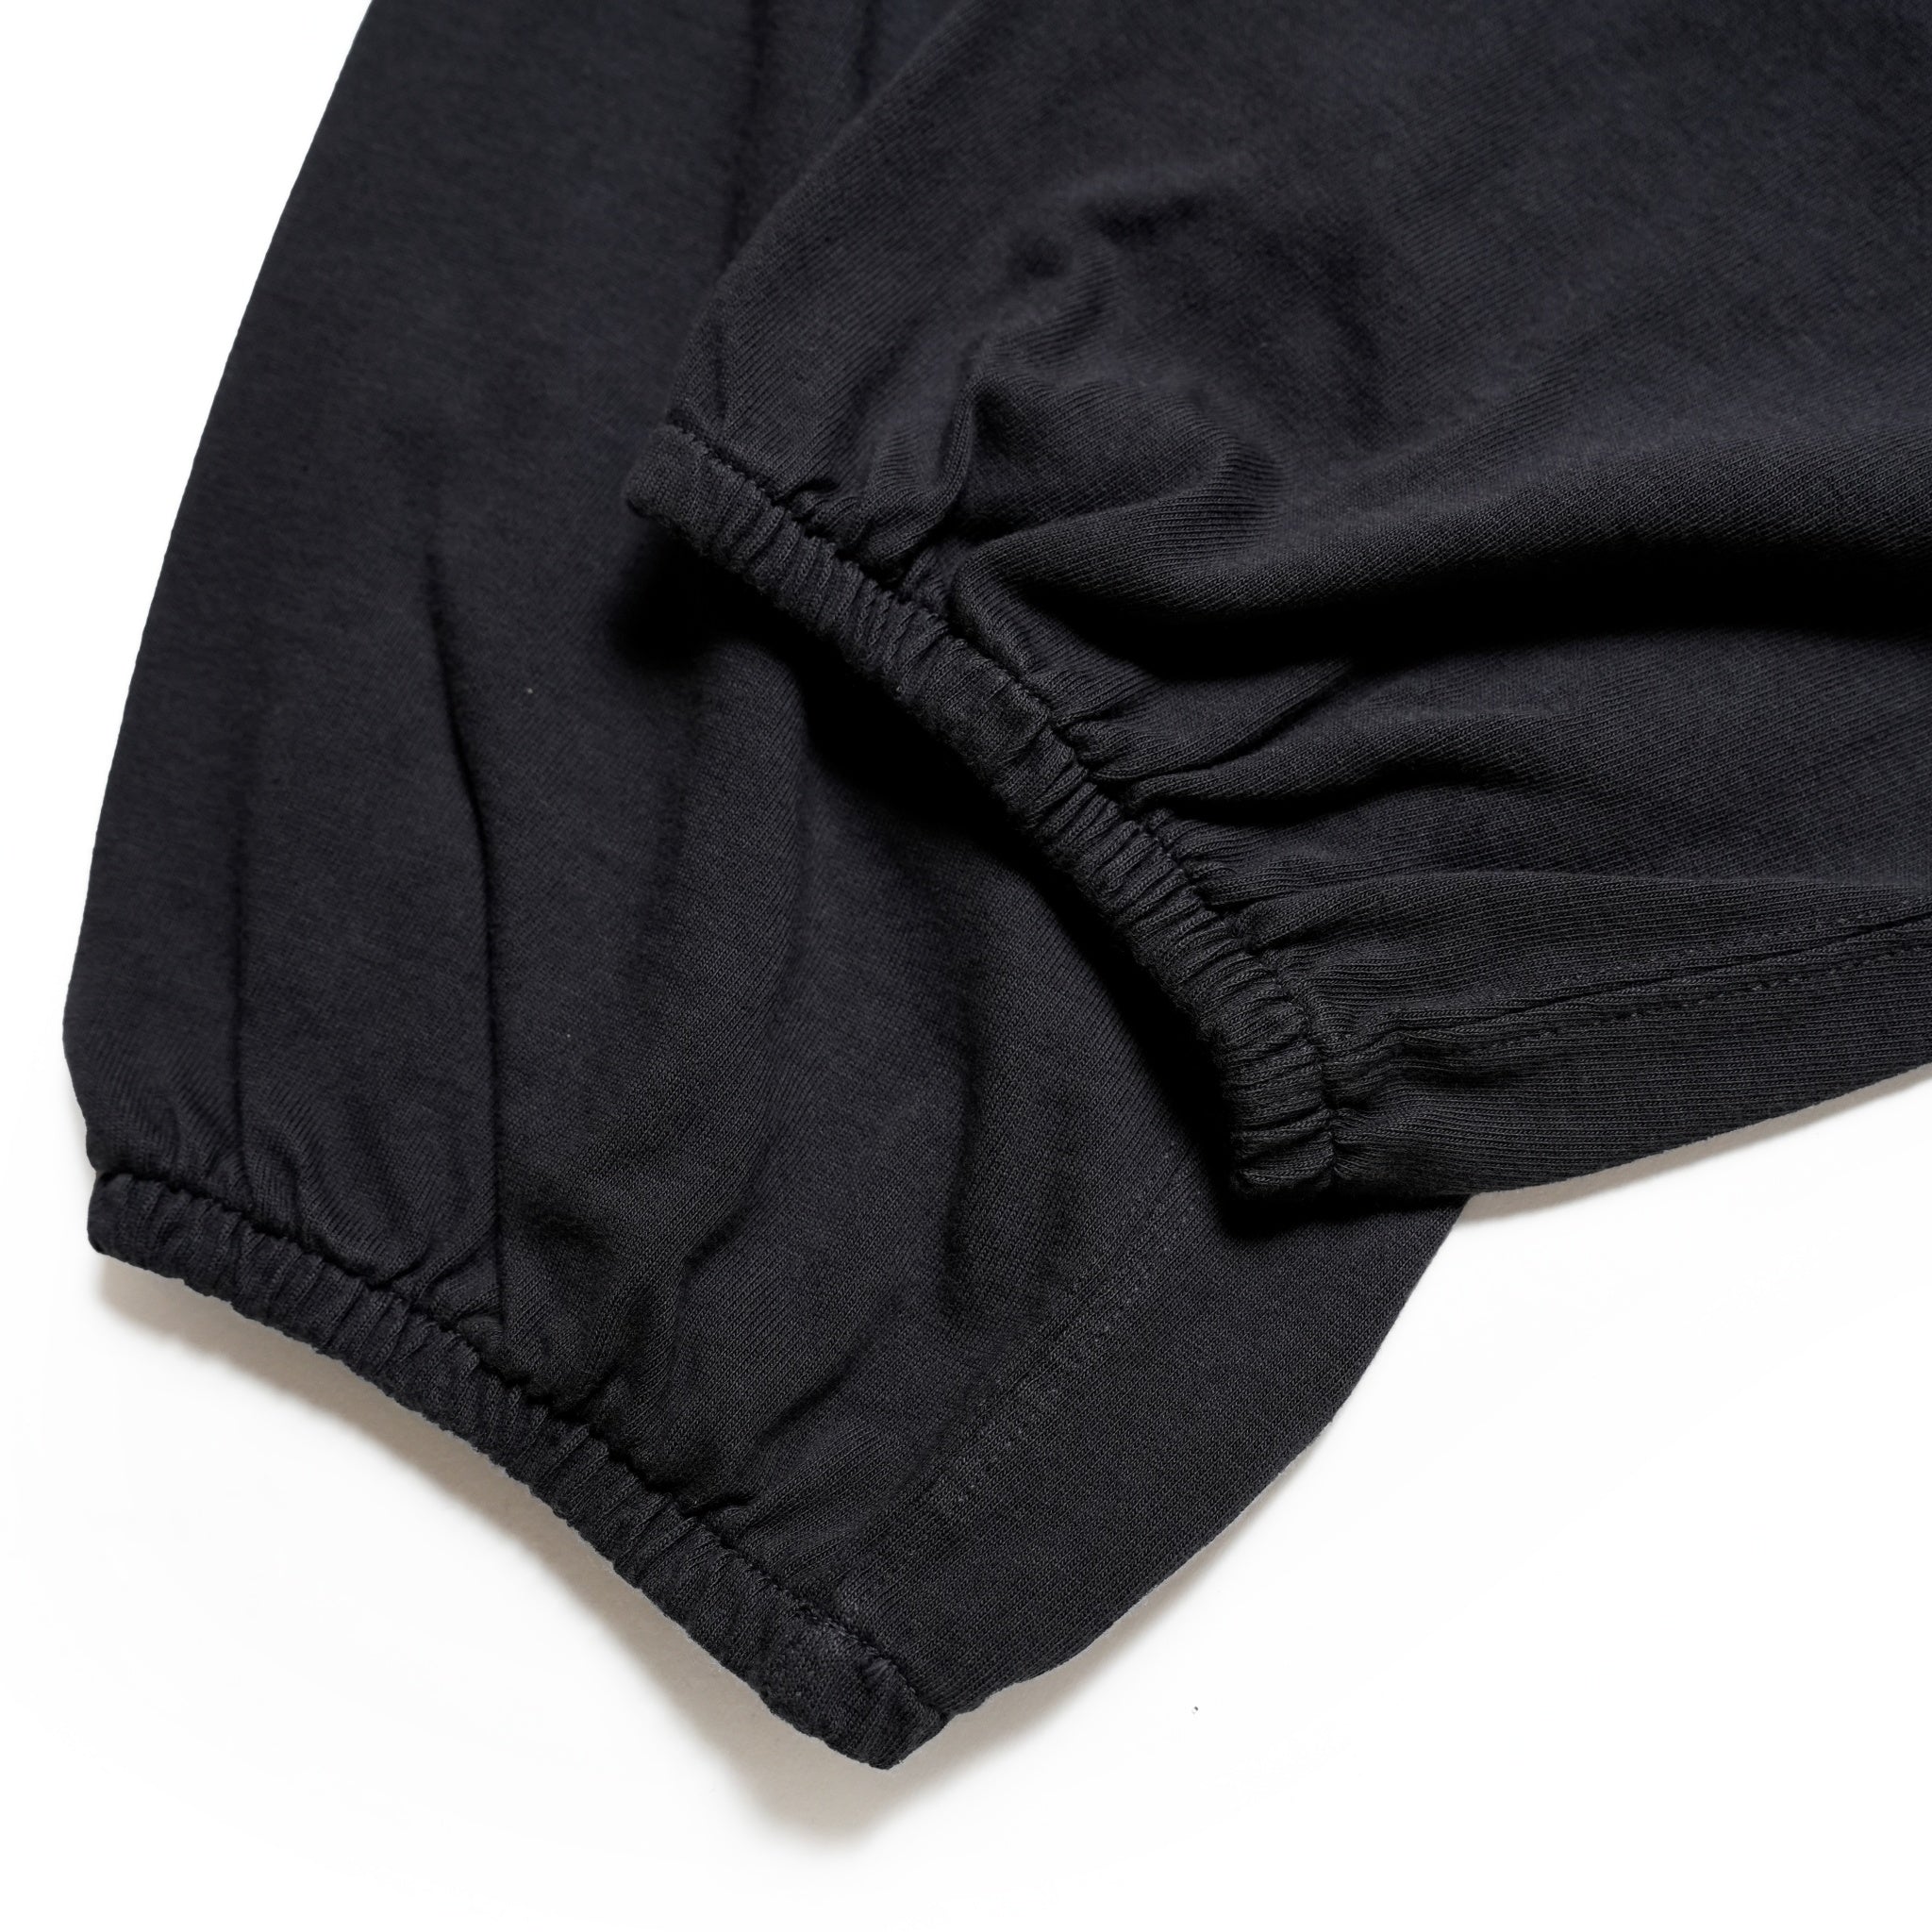 No:cstm03 | Name:Heavy Coton Sweat Pants | Color:#White,#Black,#Navy,#Charcoal | Size:M/L/XL | 【Smoke T One】【ONE CS FITS ALL】